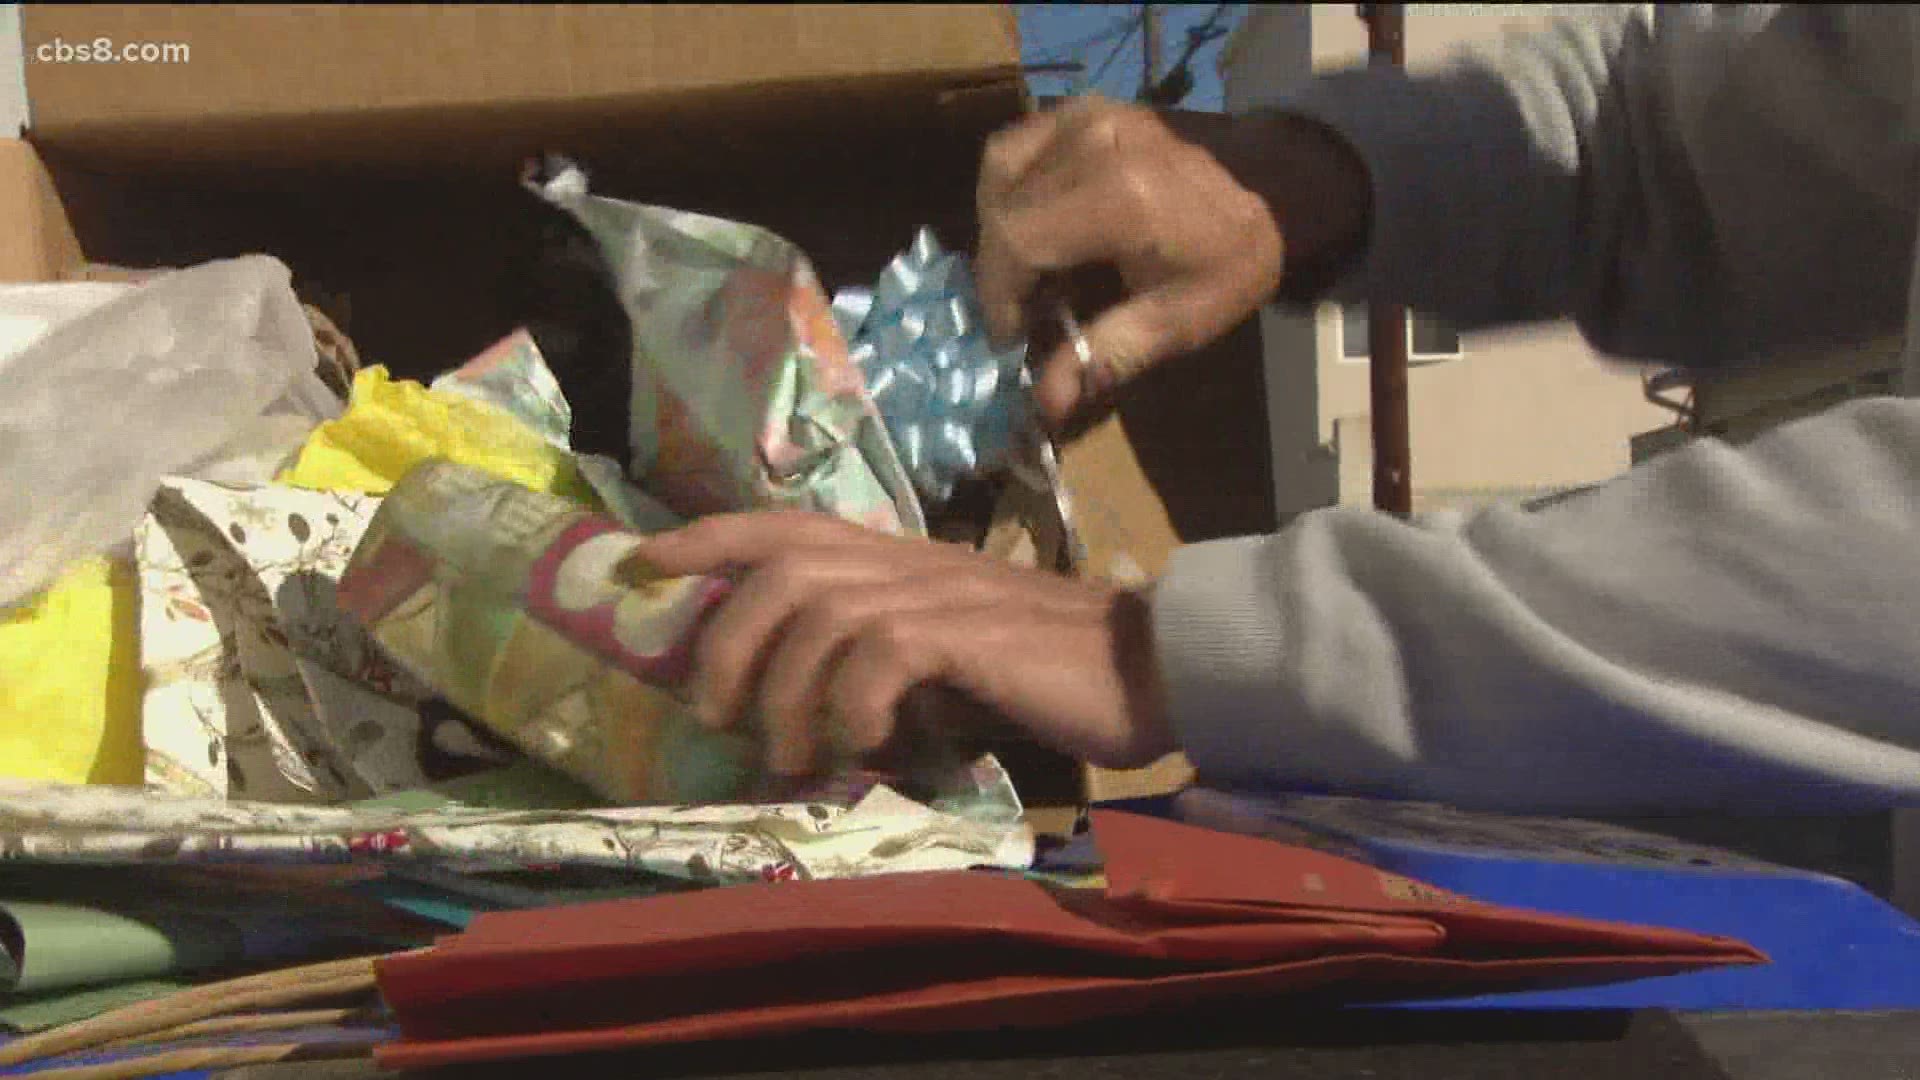 Can wrapping paper do into the blue bins? We asked!